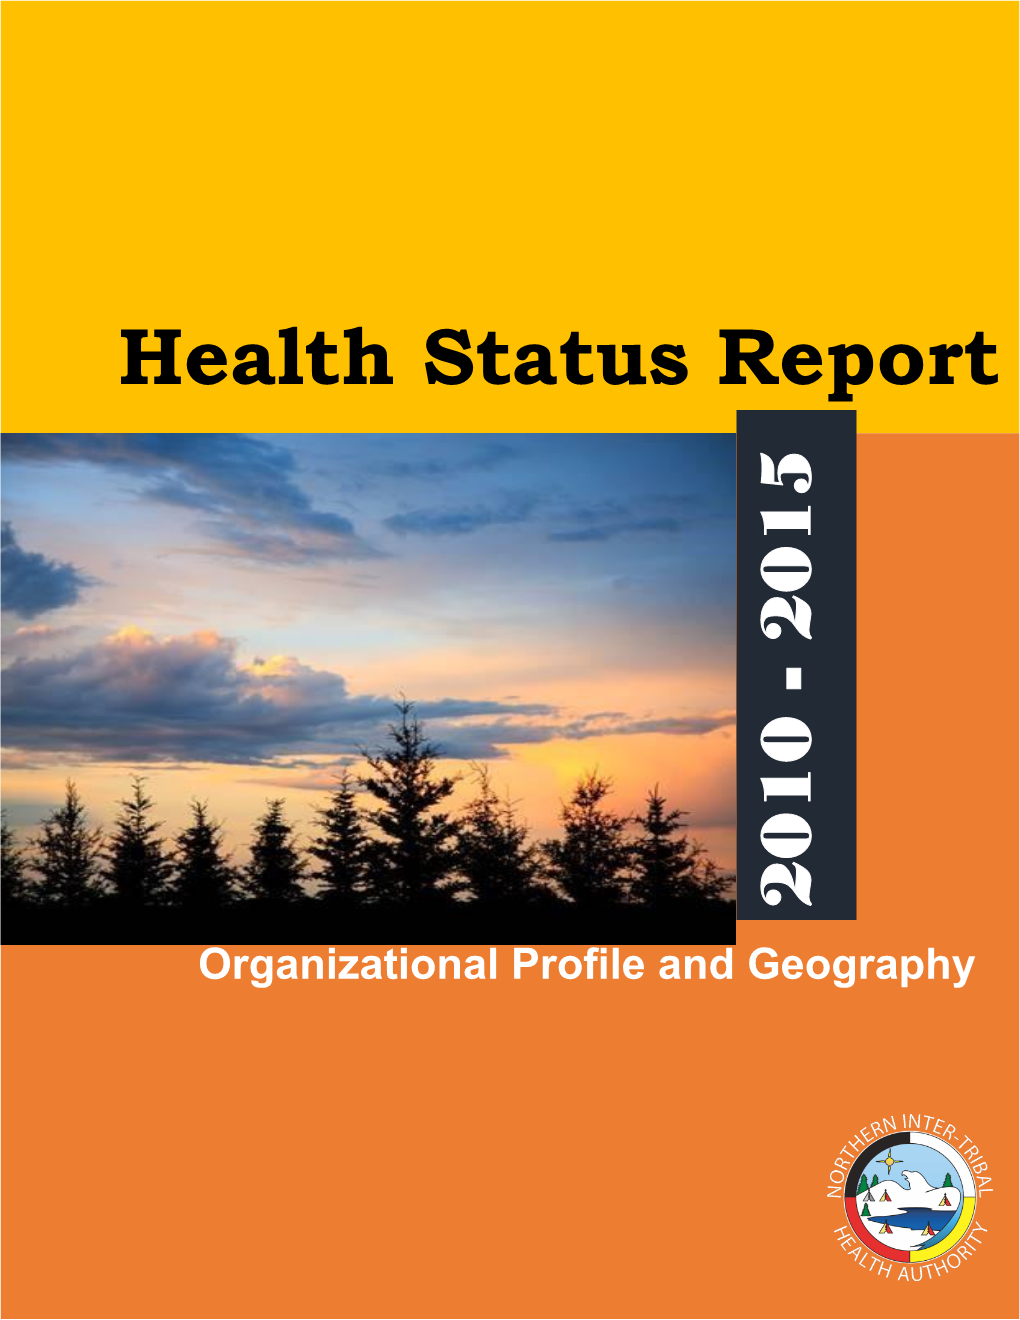 Health Status Report 2010-2015: Organizational Profile and Geography